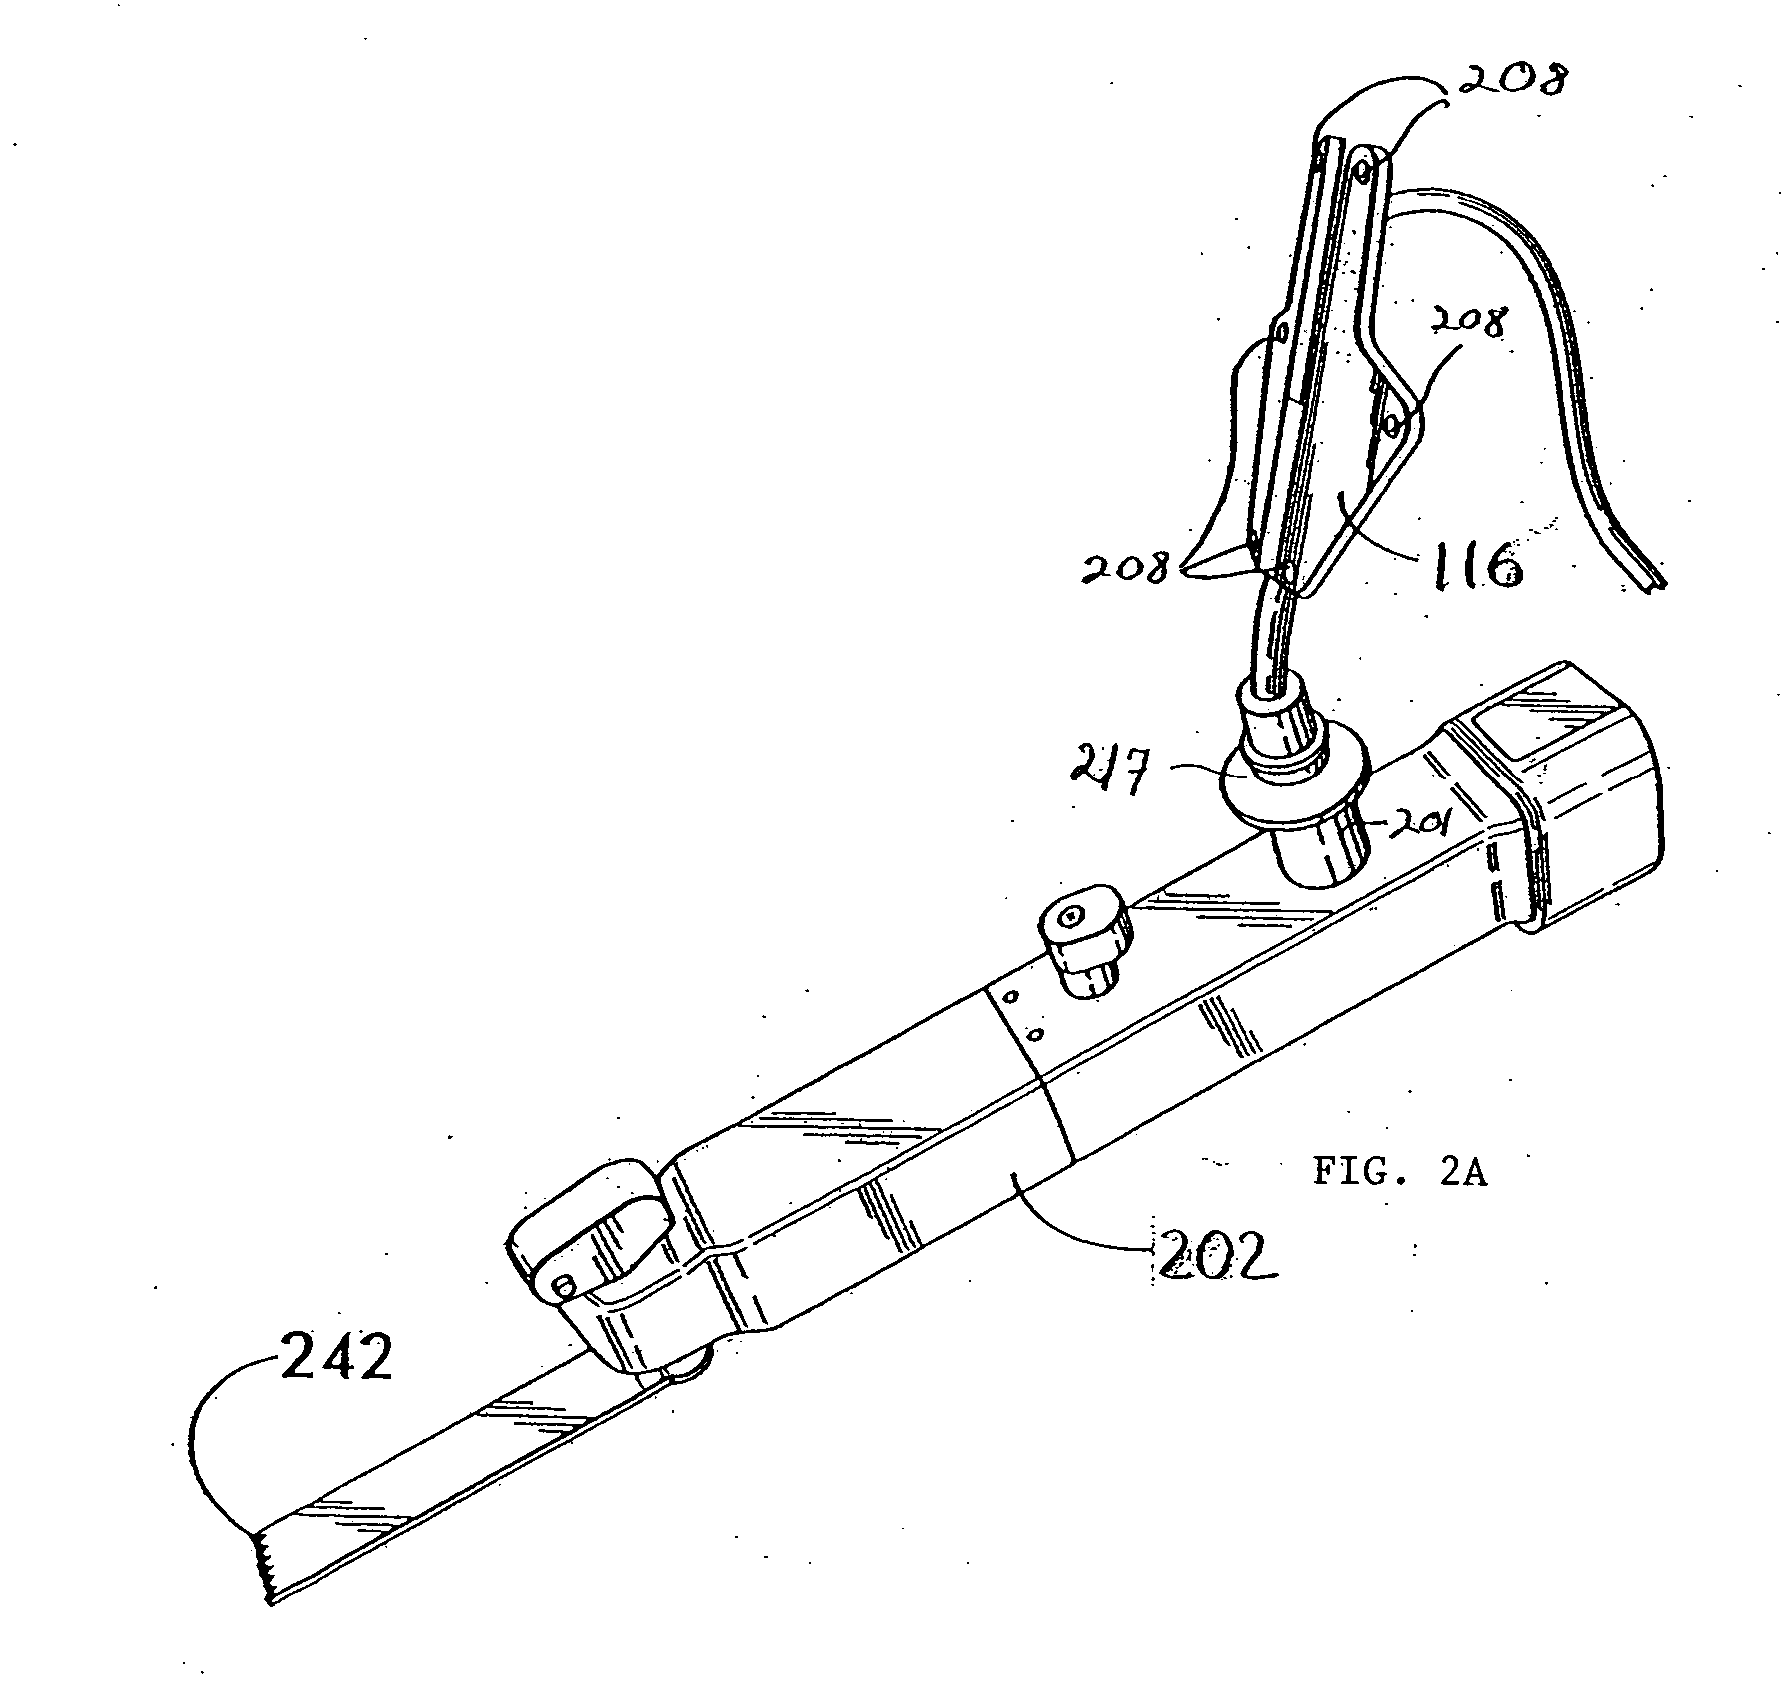 Method and apparatus for navigating a cutting tool during orthopedic surgery using a localization system